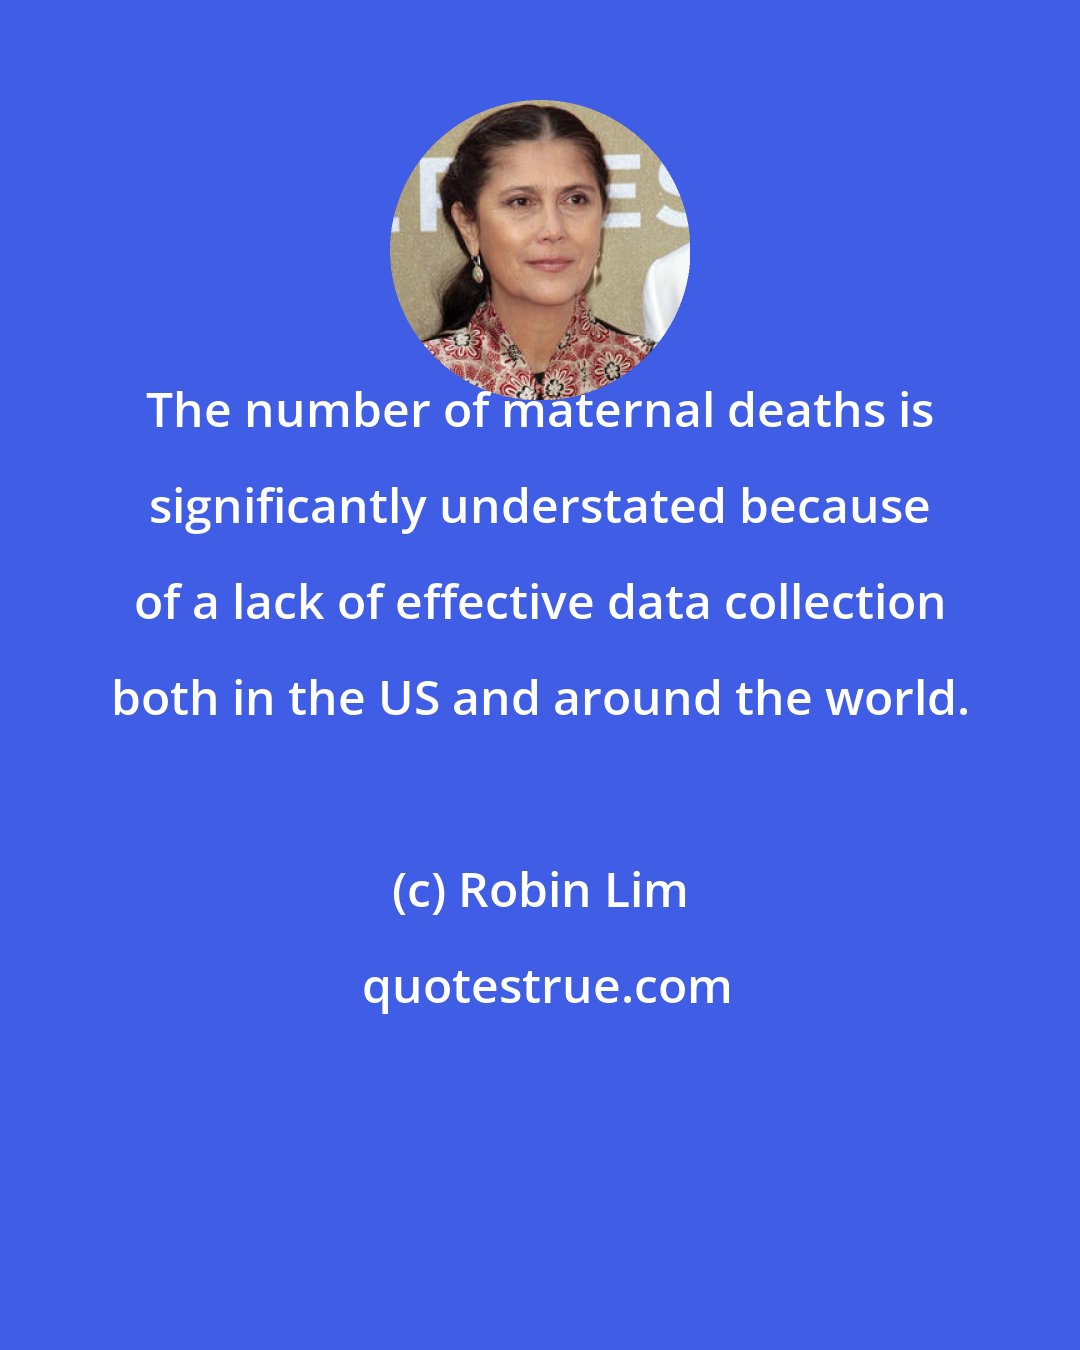 Robin Lim: The number of maternal deaths is significantly understated because of a lack of effective data collection both in the US and around the world.